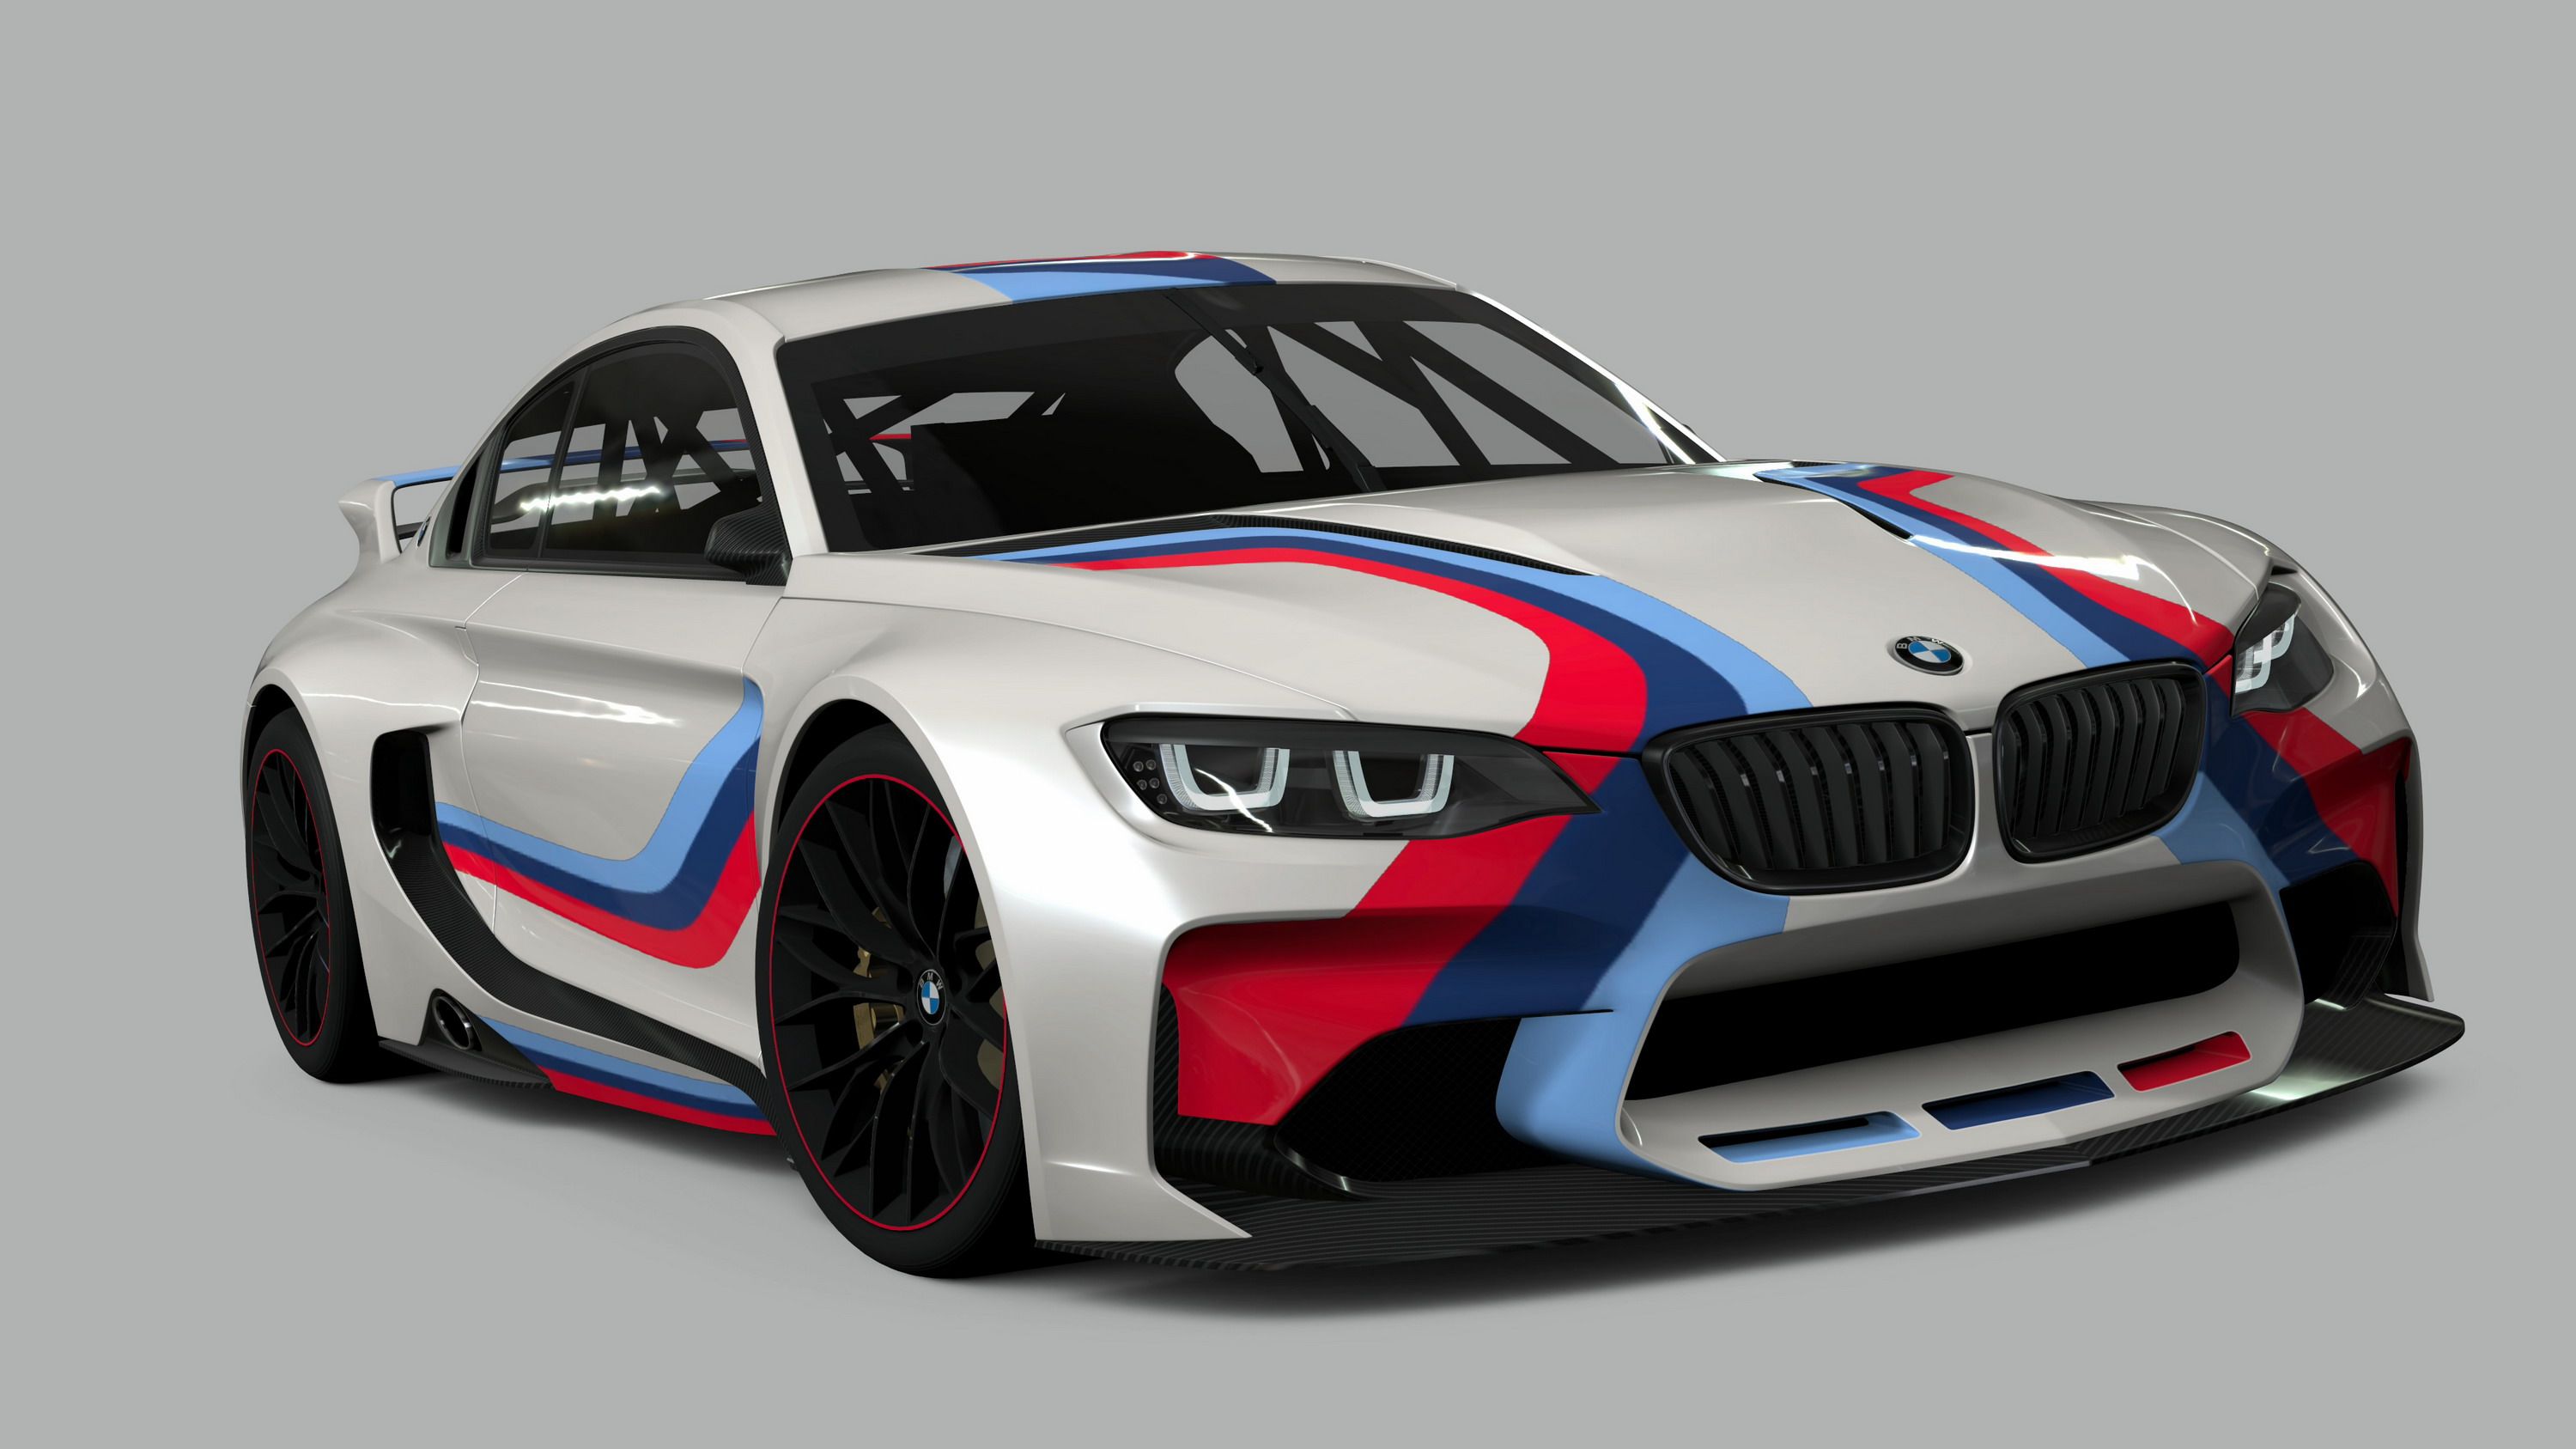 2016 BMW M2 Could Get Inspiration From Vision Gran Turismo